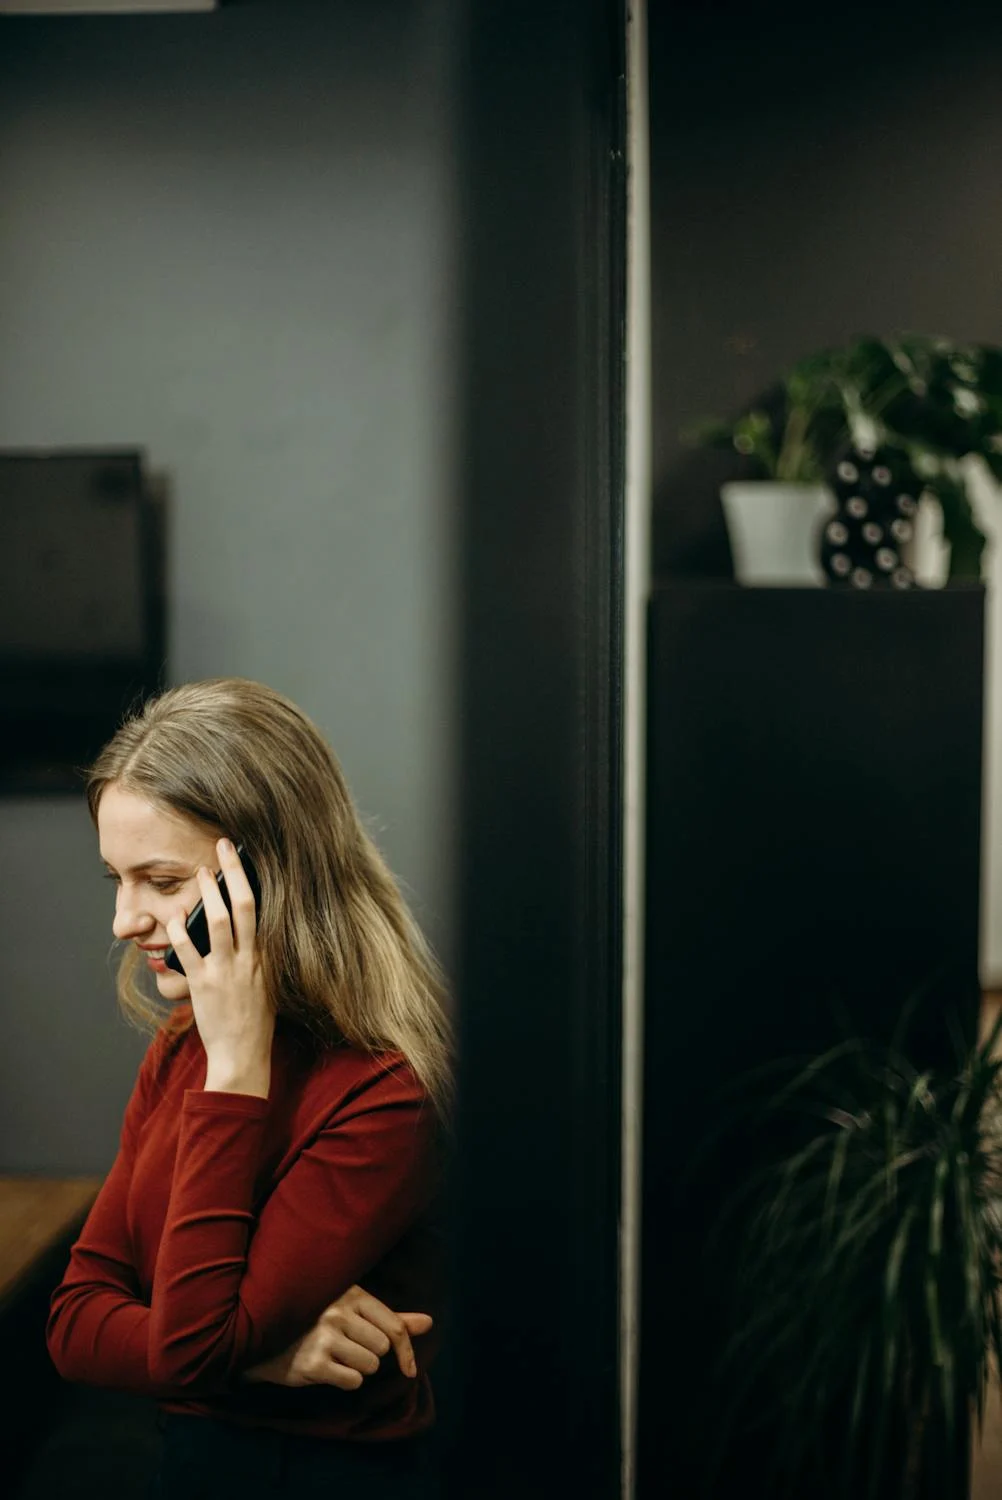 A woman calling someone from her phone | Source: Pexels